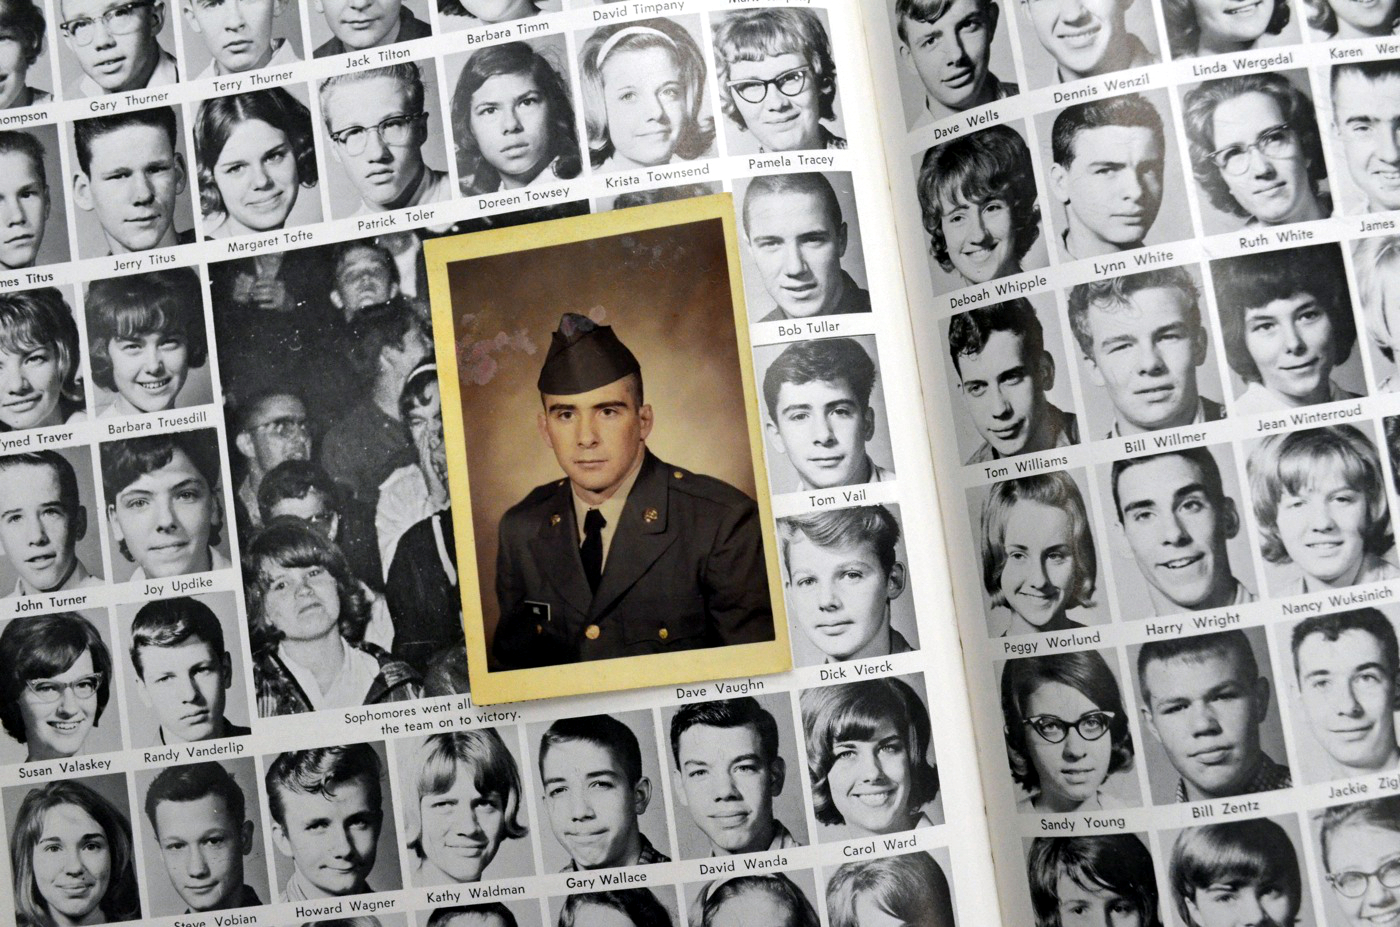 Project To Collect Photos Of Every Wisconsin Soldier Killed In Vietnam War Nears Its Goal